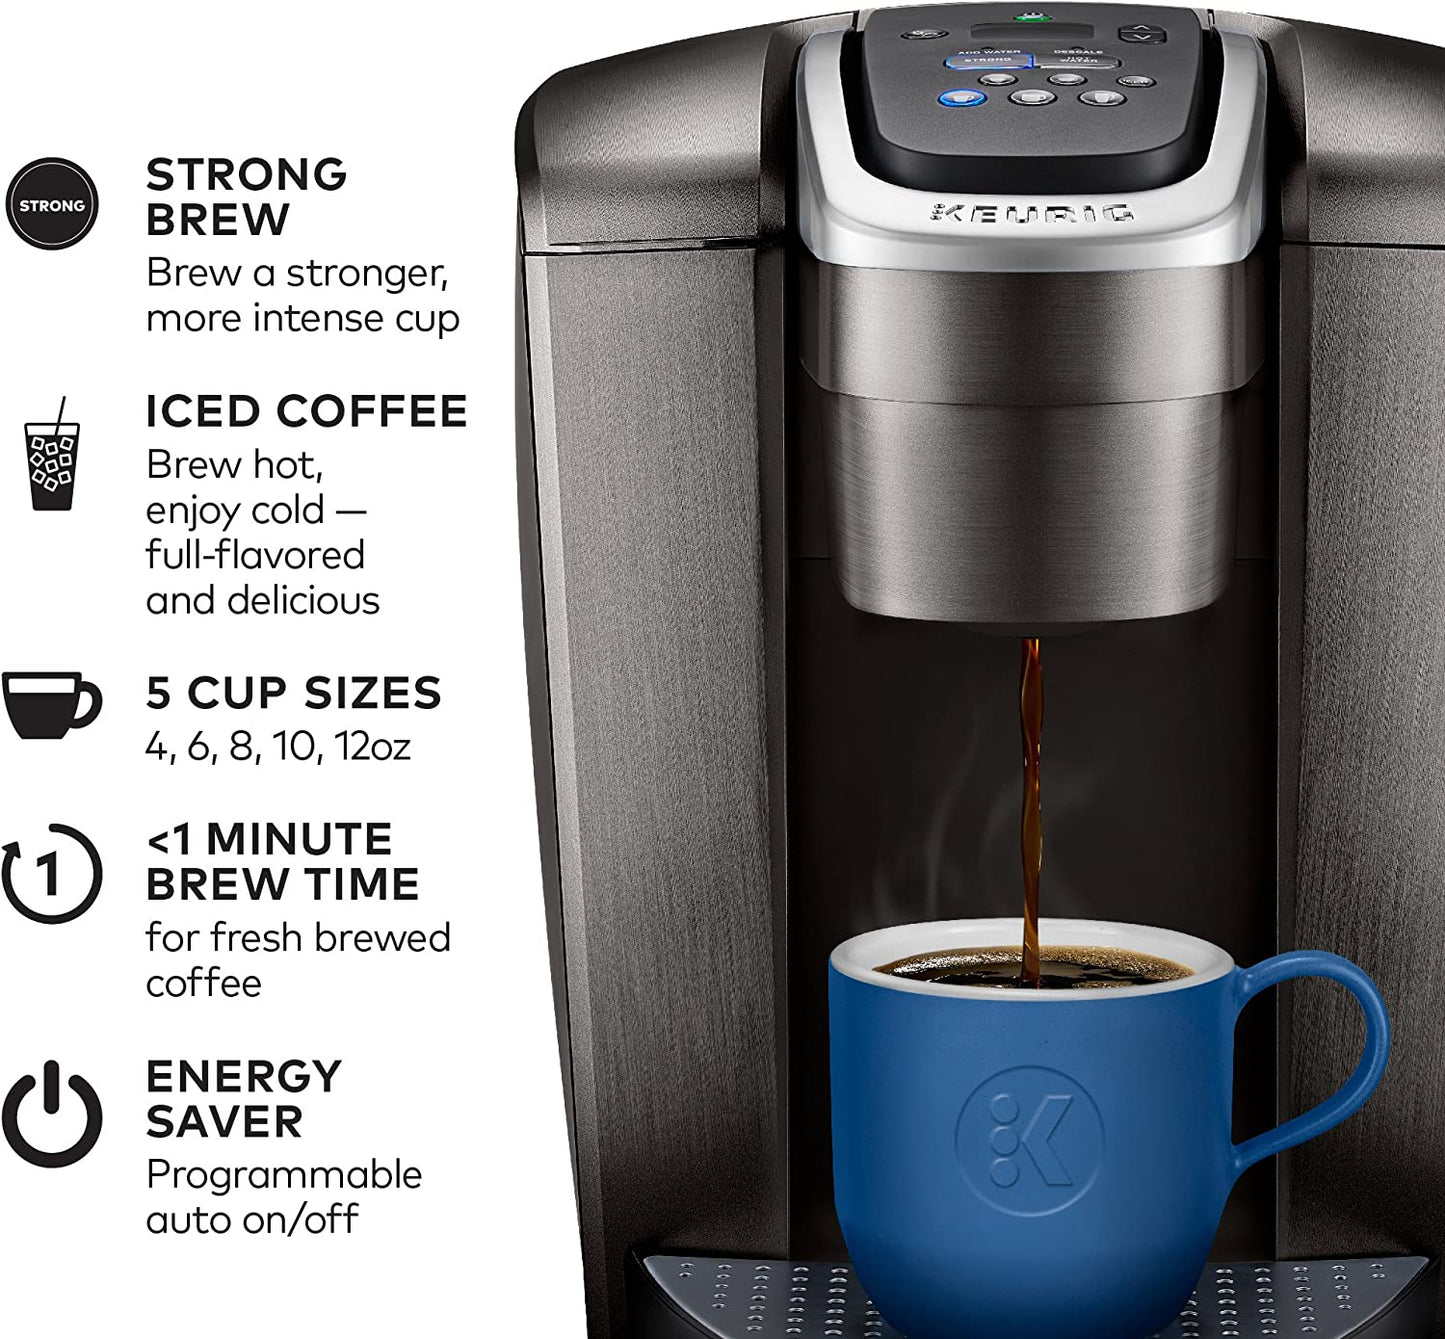 Keurig K-Elite Coffee Maker, Single Serve K-Cup Pod Coffee Brewer, With Iced Coffee Capability, Brushed Slat